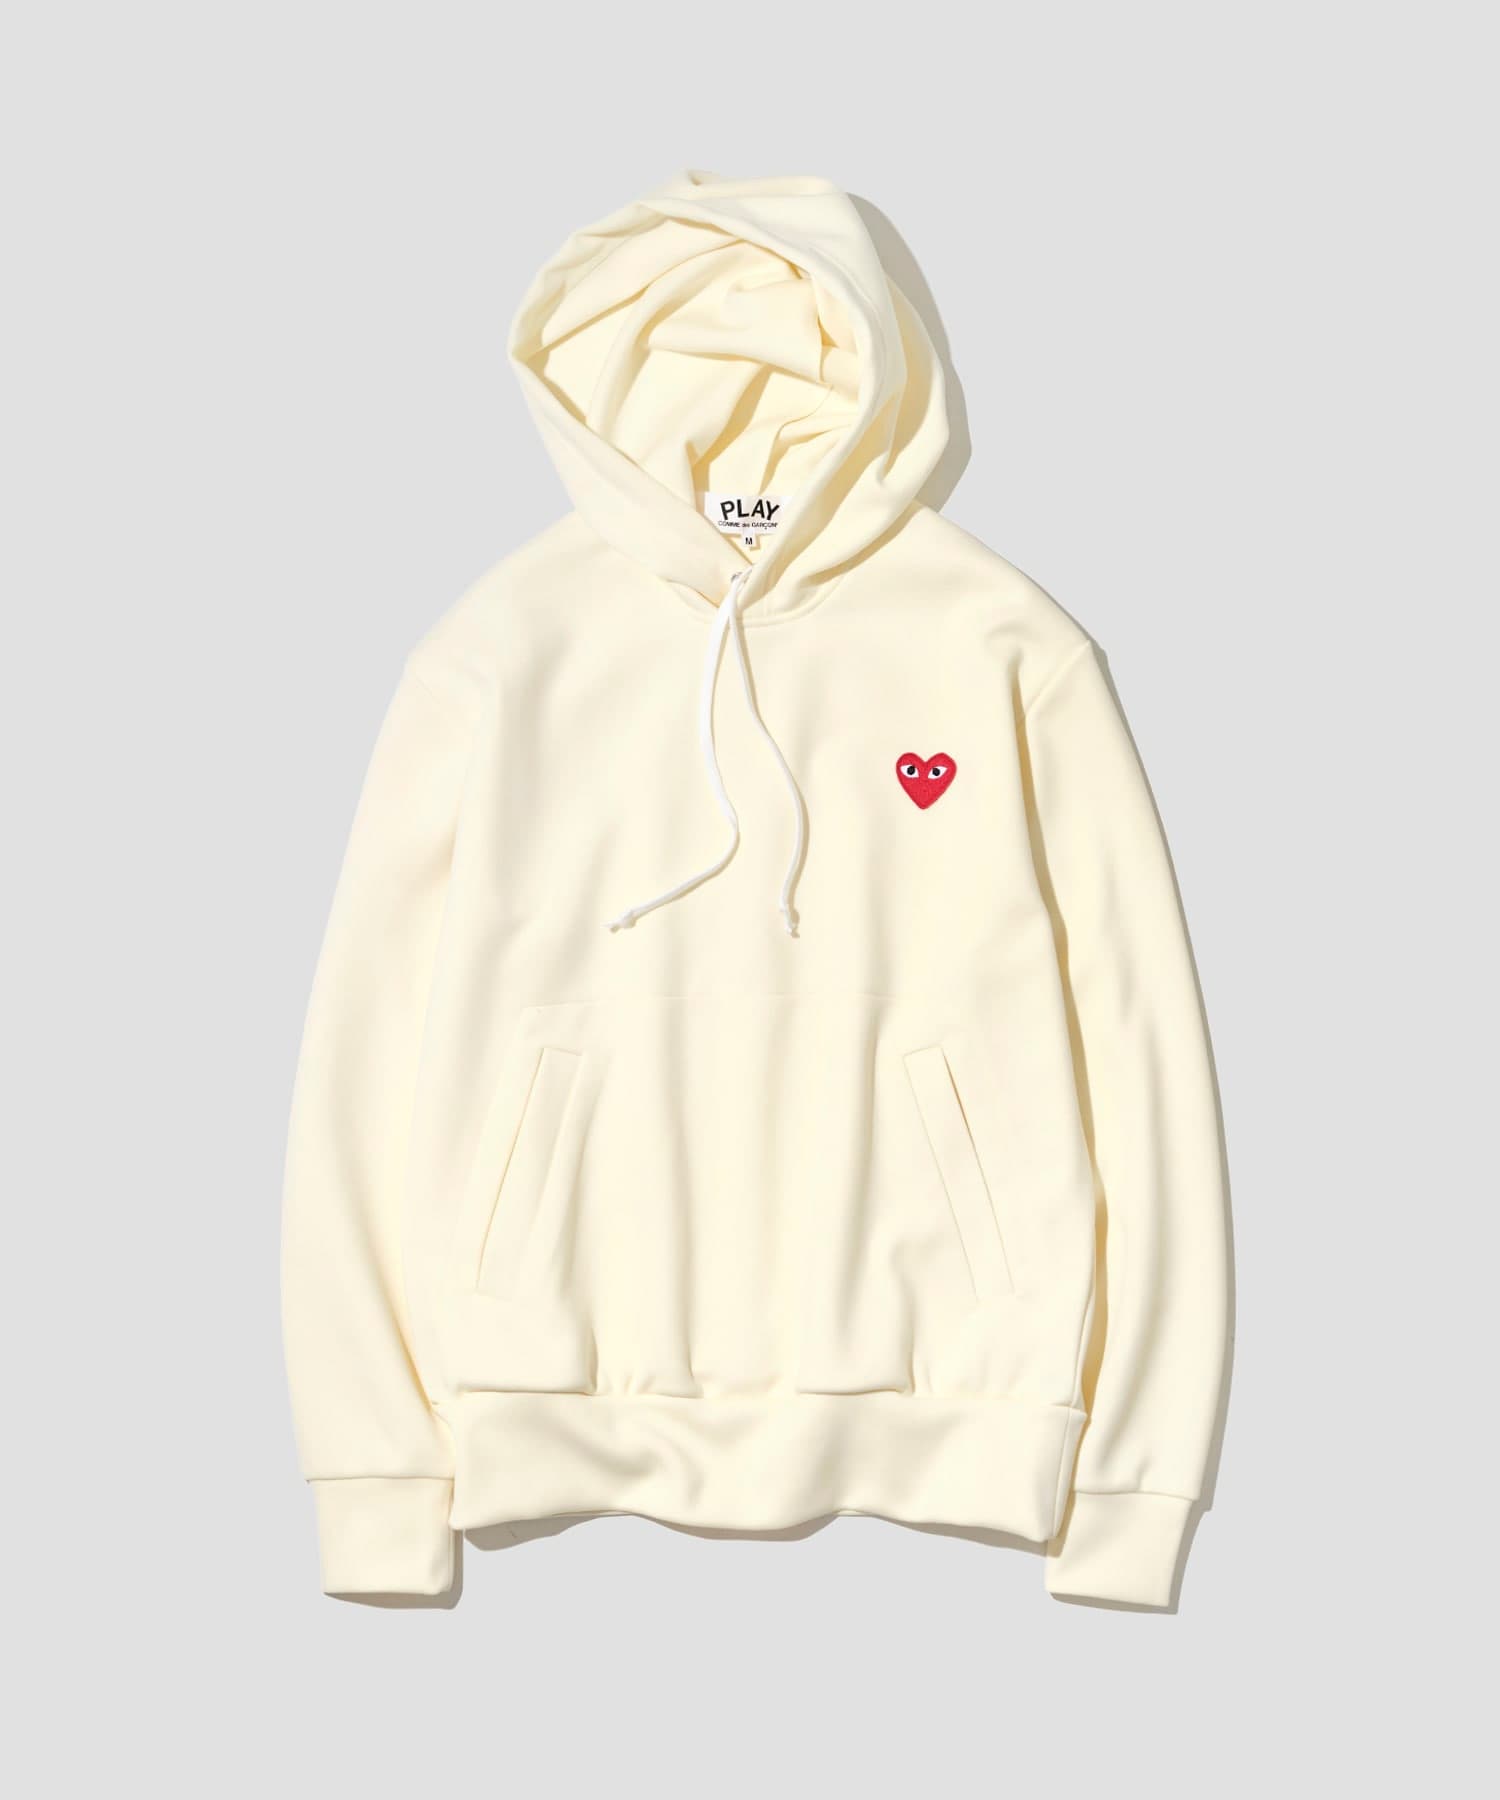 AZ-T174-051 PLAY HOODED SWEATSHIRT RED HEART ｜ PLAY Comme des Garcons